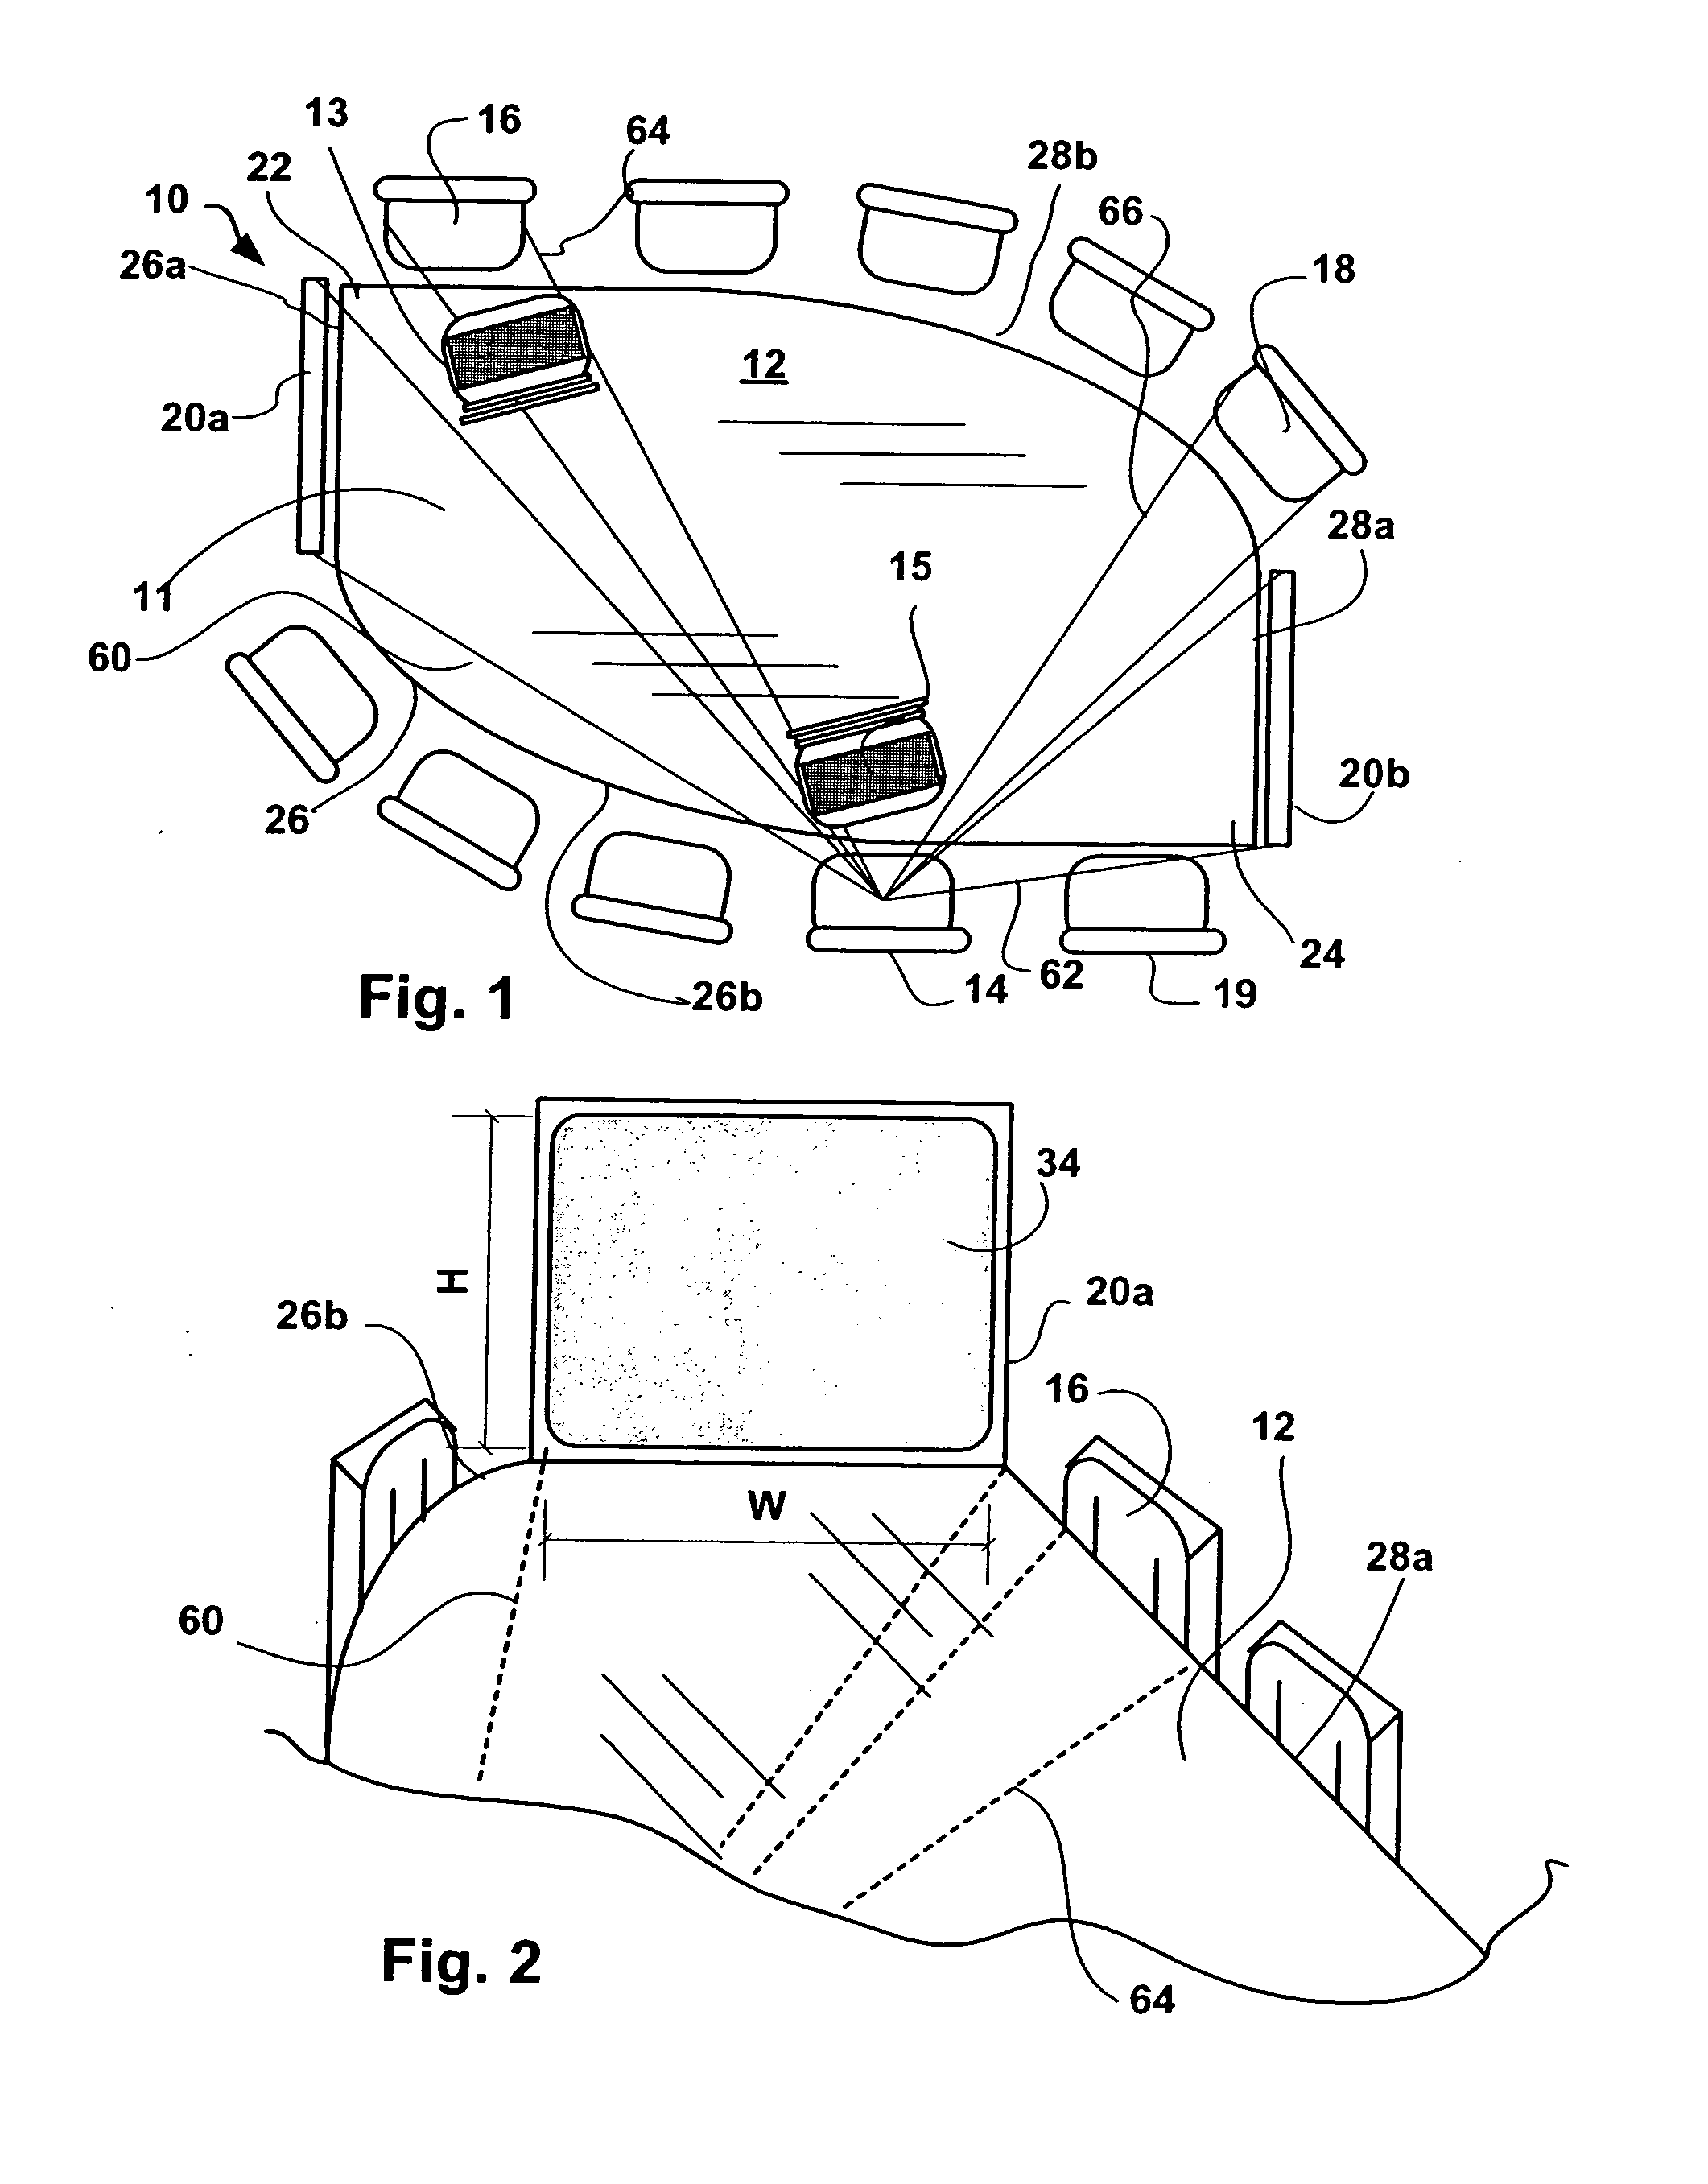 Multi-use conferencing space, table arrangement and display configuration